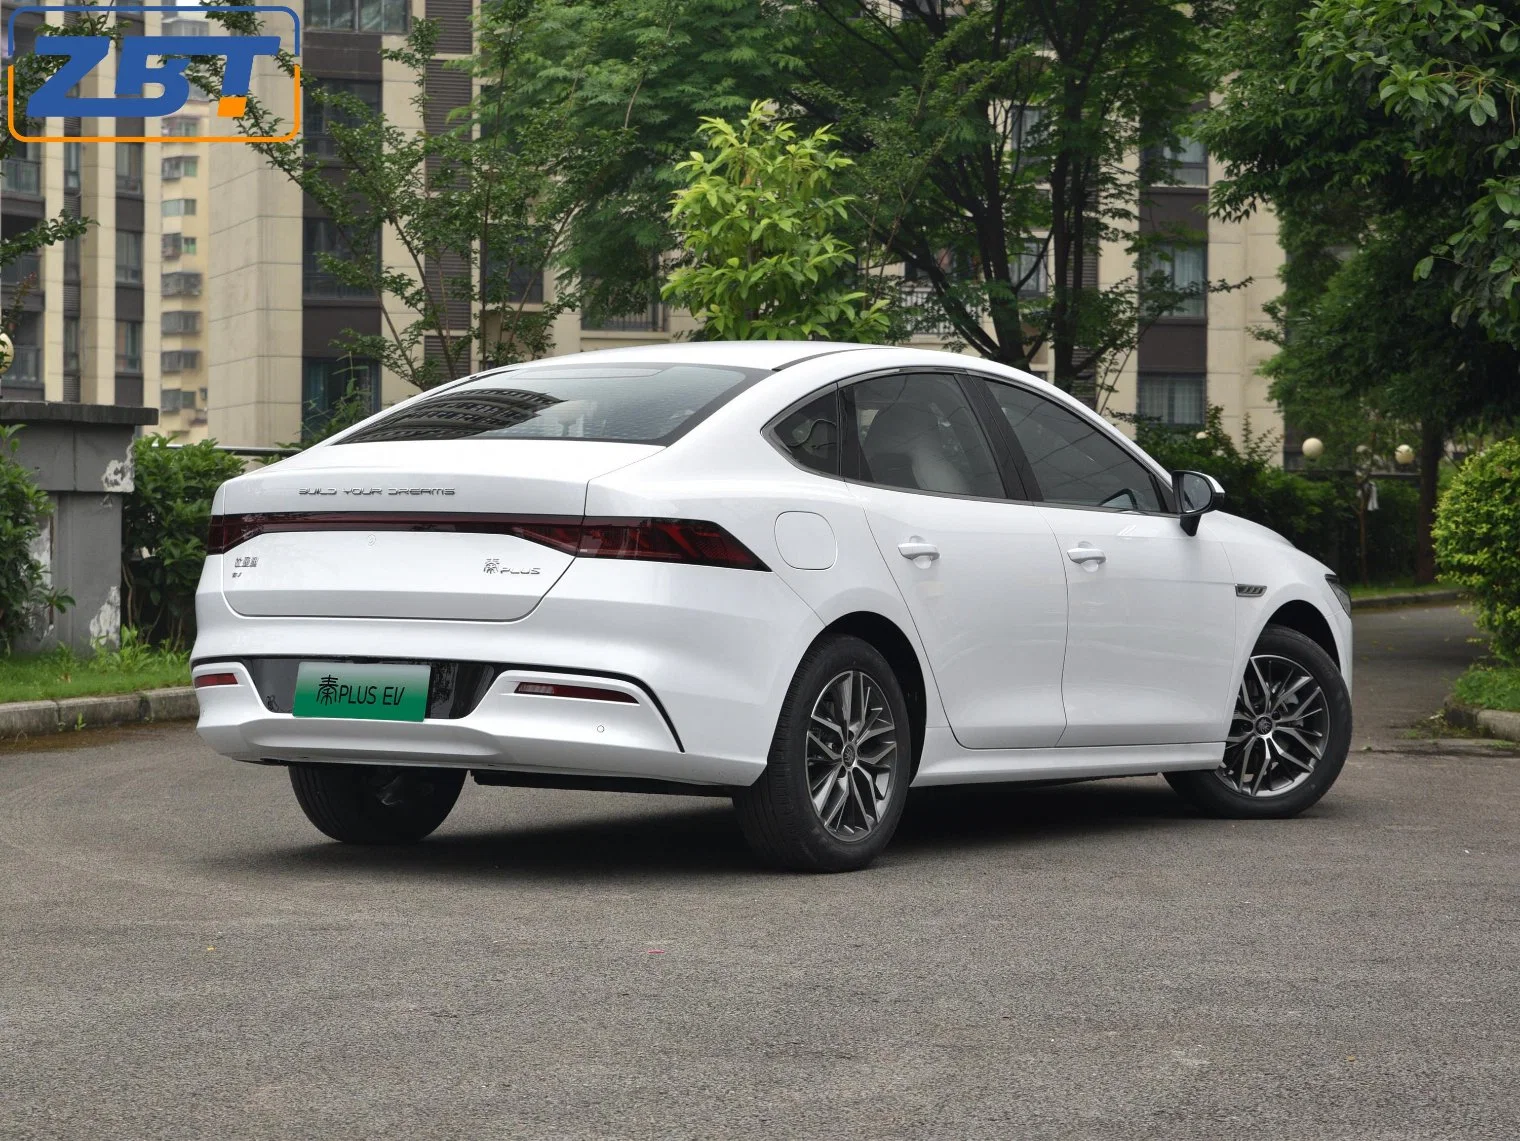 Made in China Nedc 400km Range Electric Brushless Motor Auto Used Car Byd Qin Plus EV Smart Compact Autos with English Menu